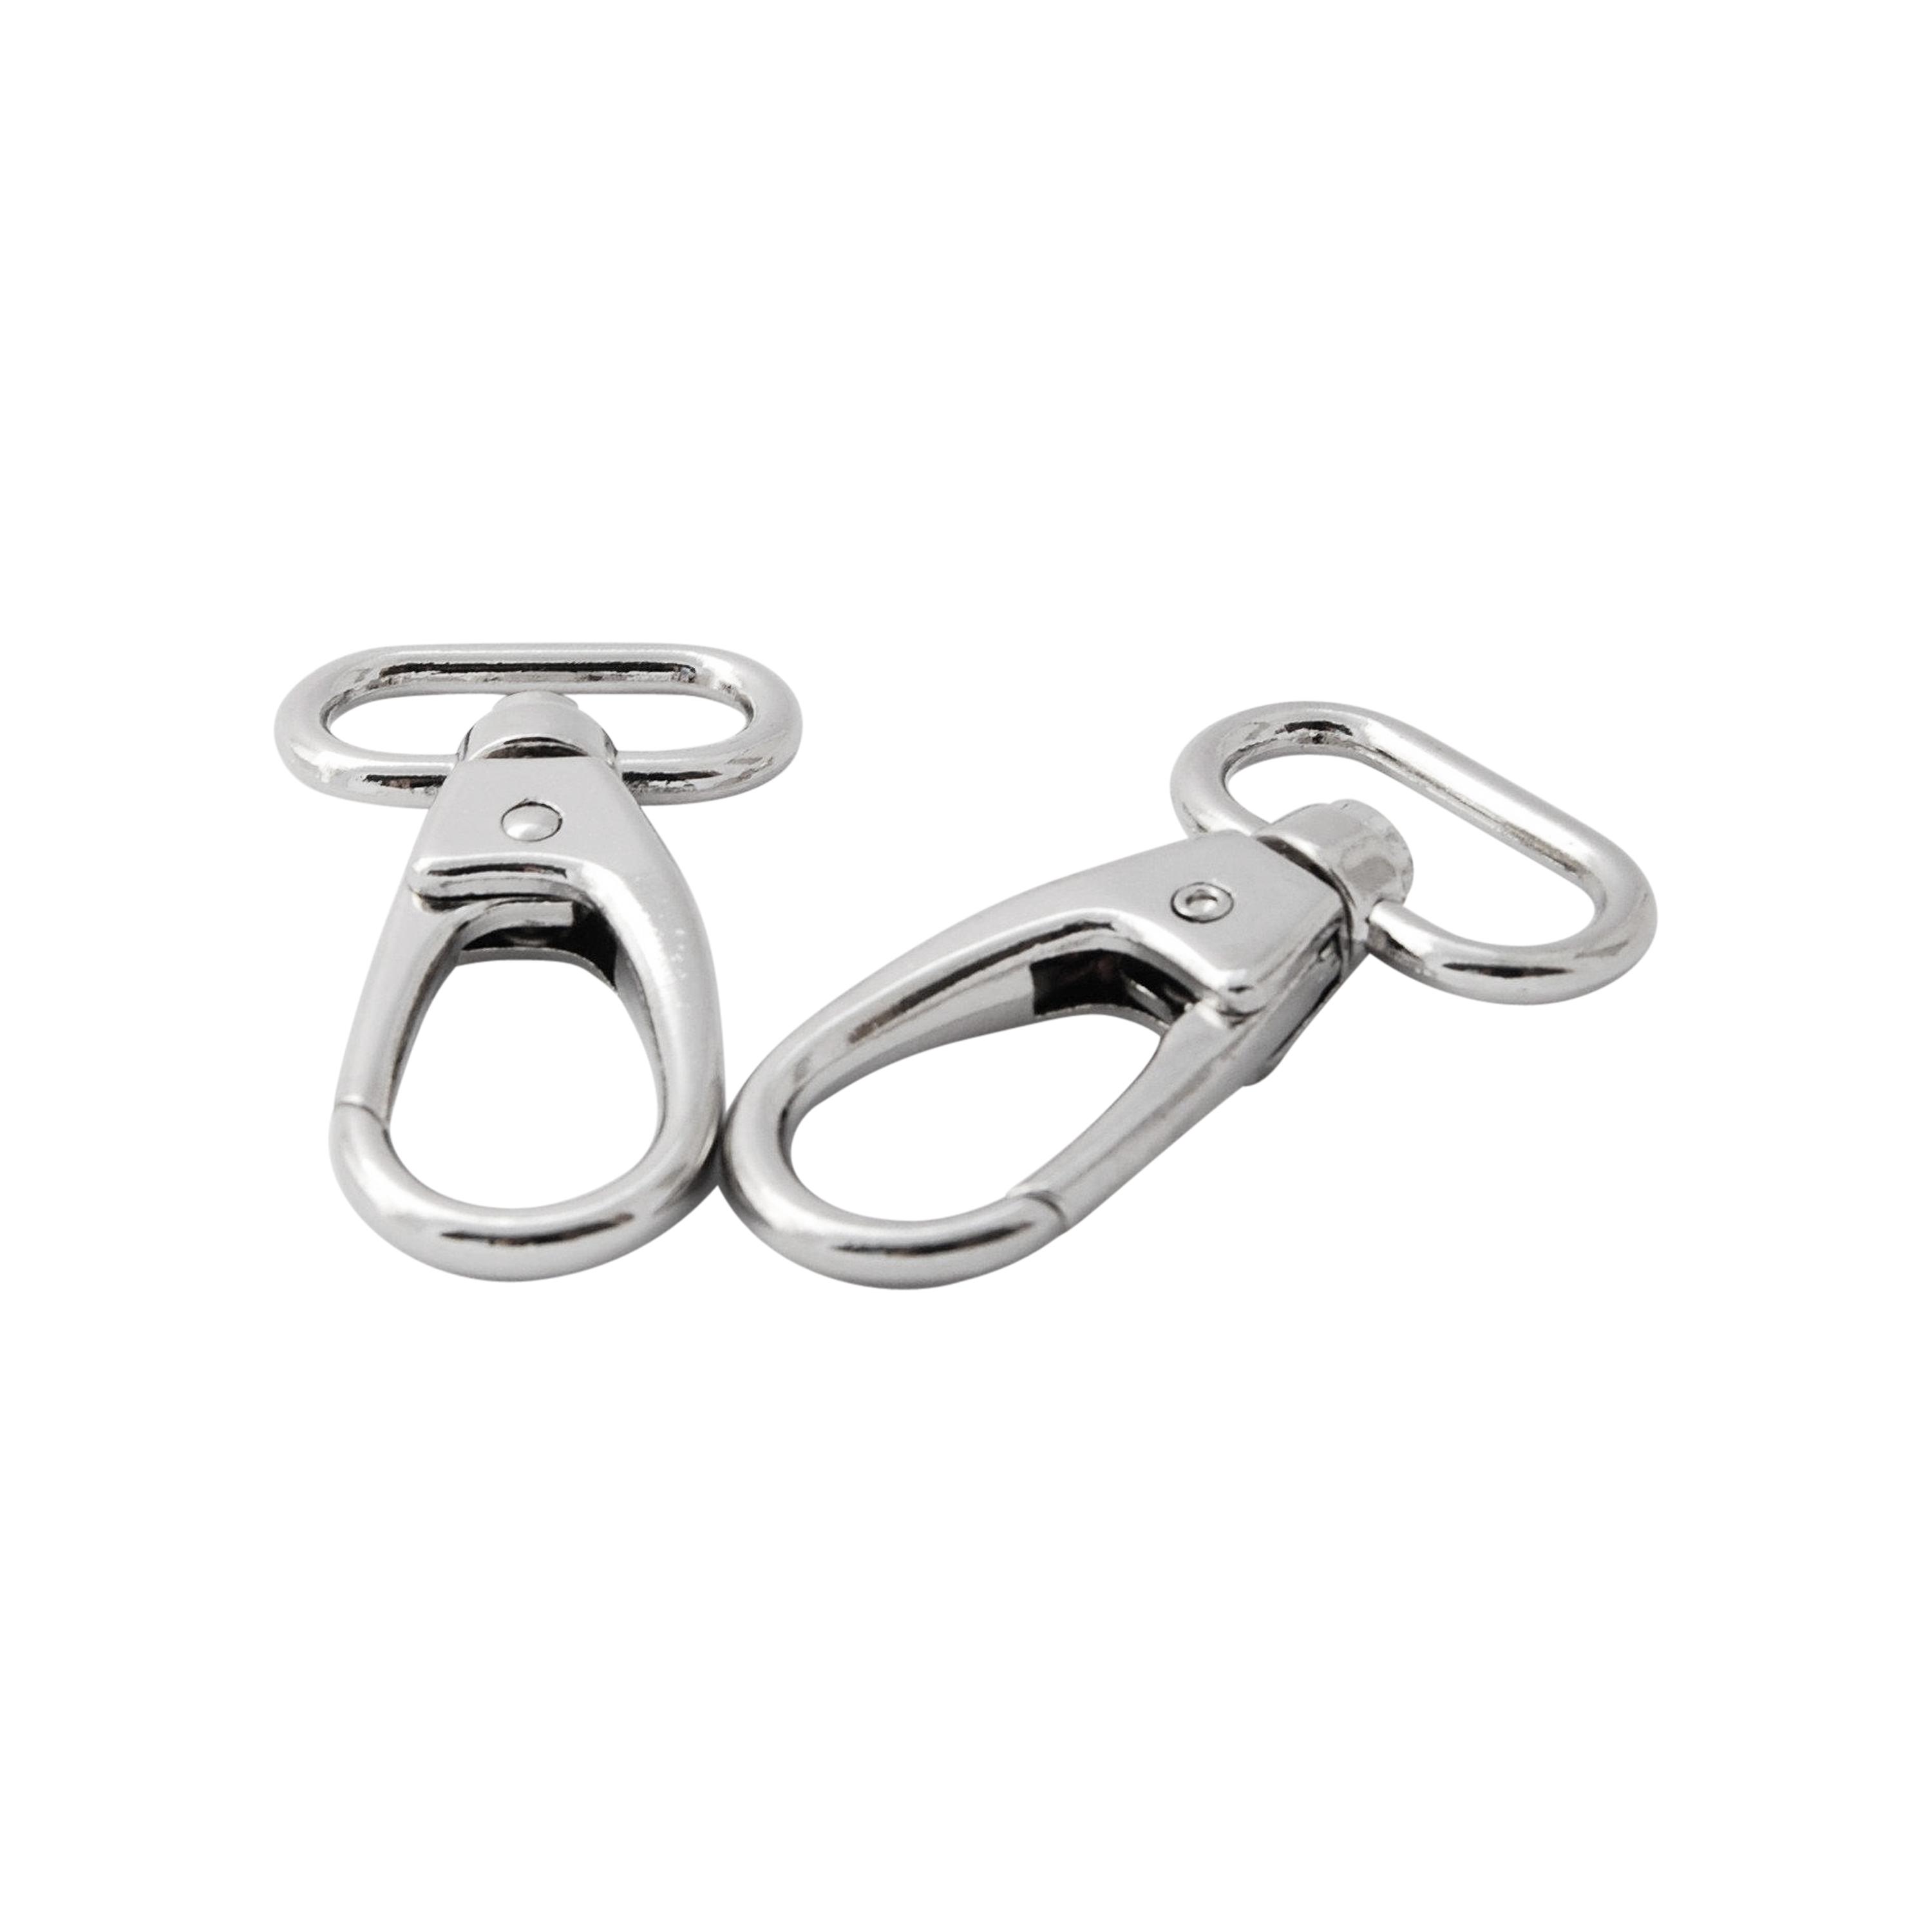 1" (25mm) silver snap hooks x 2 pack